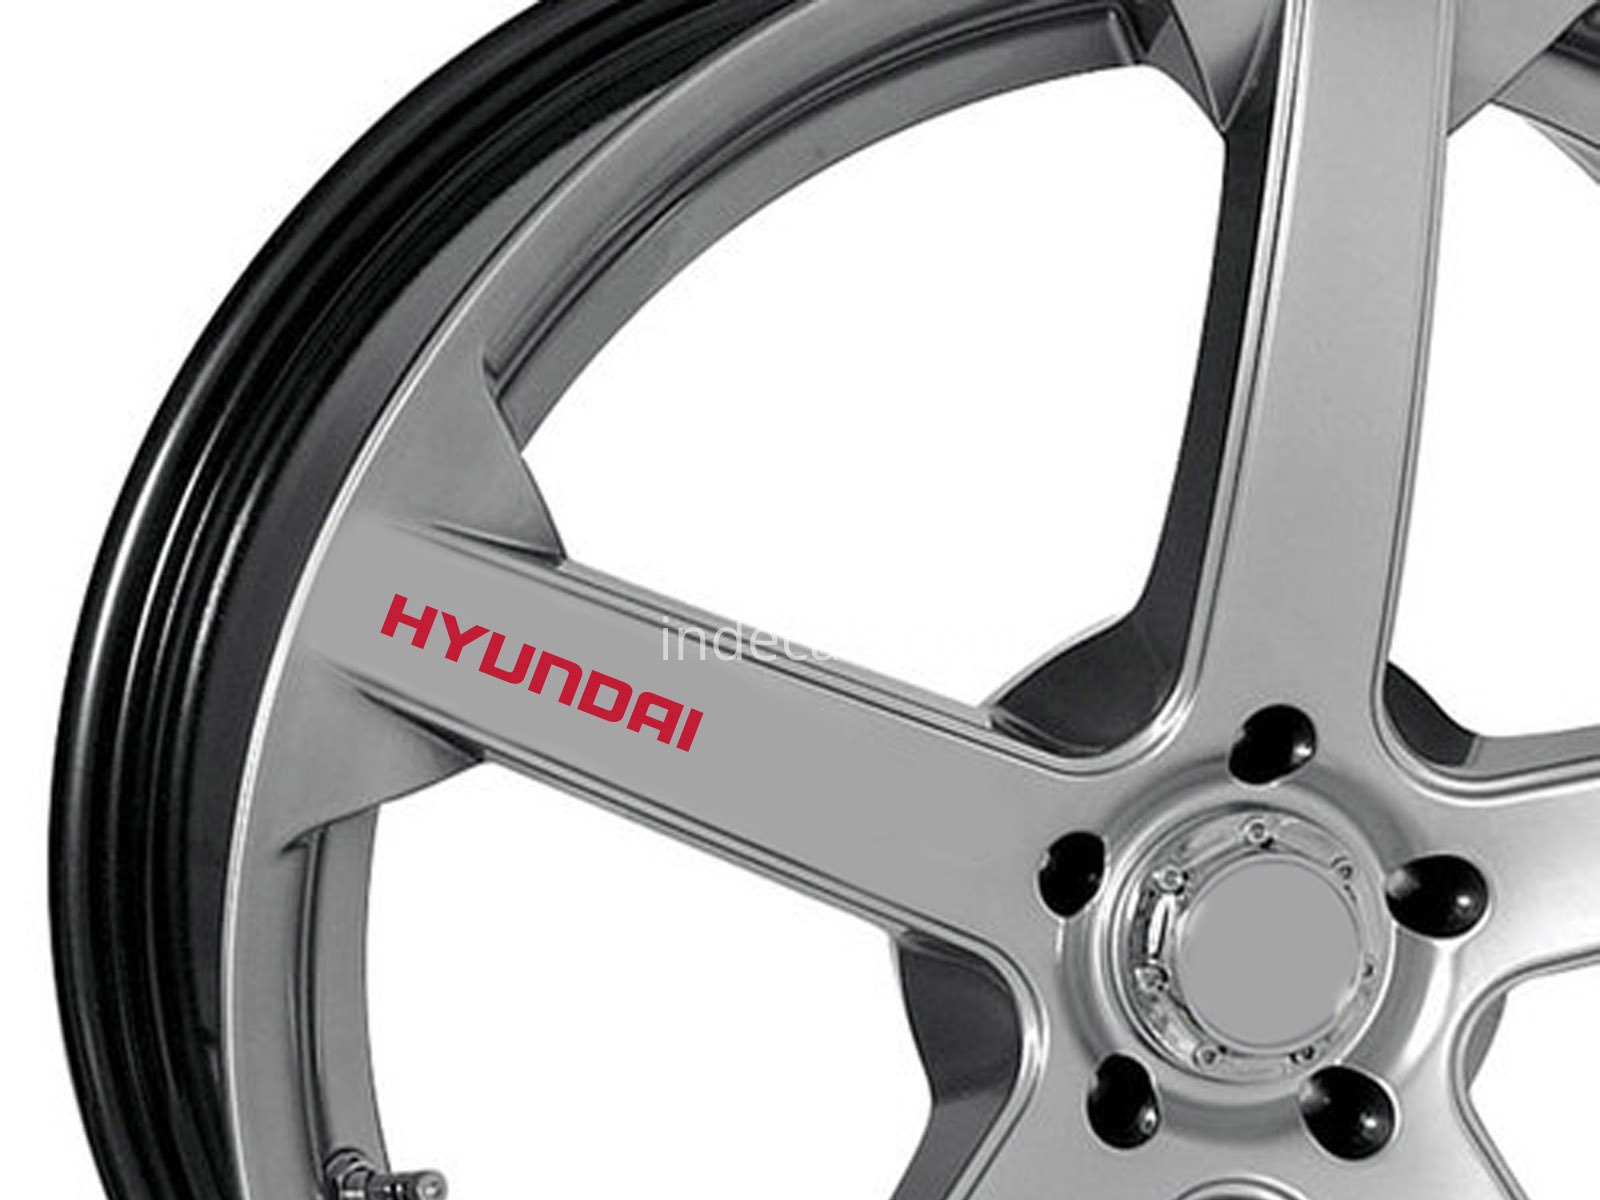 6 x Hyundai Stickers for Wheels - Red